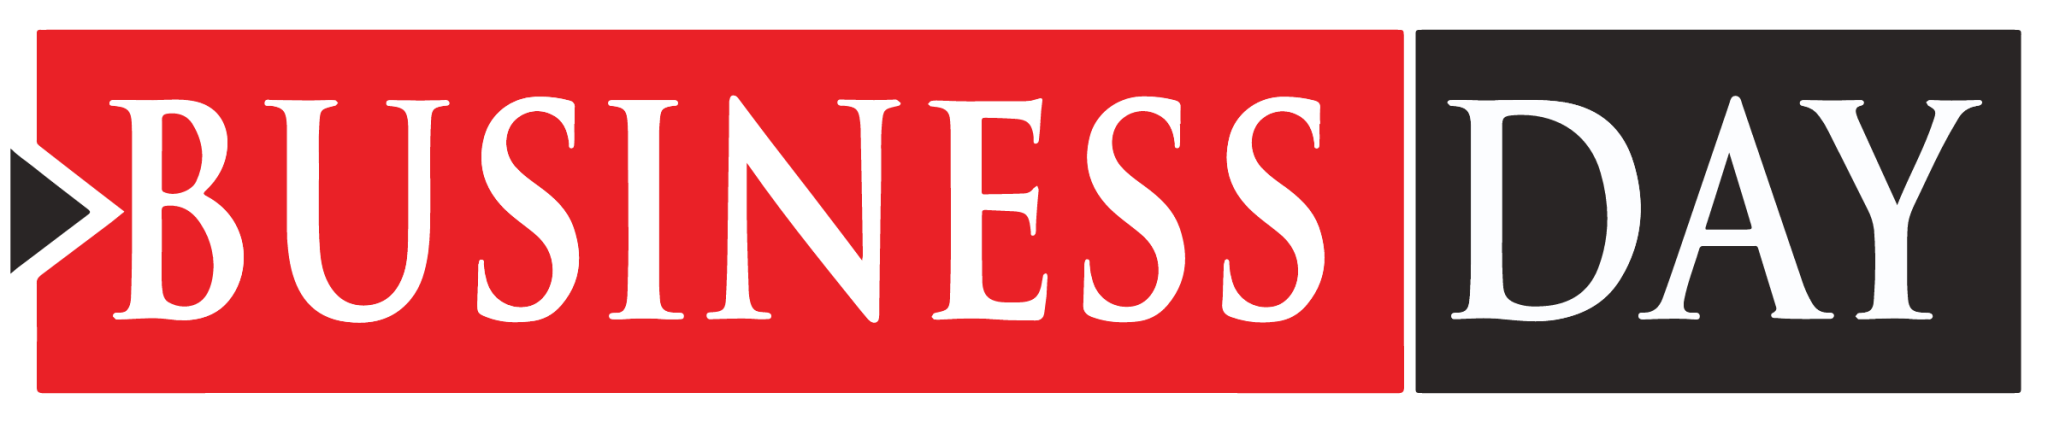 Business Day icon